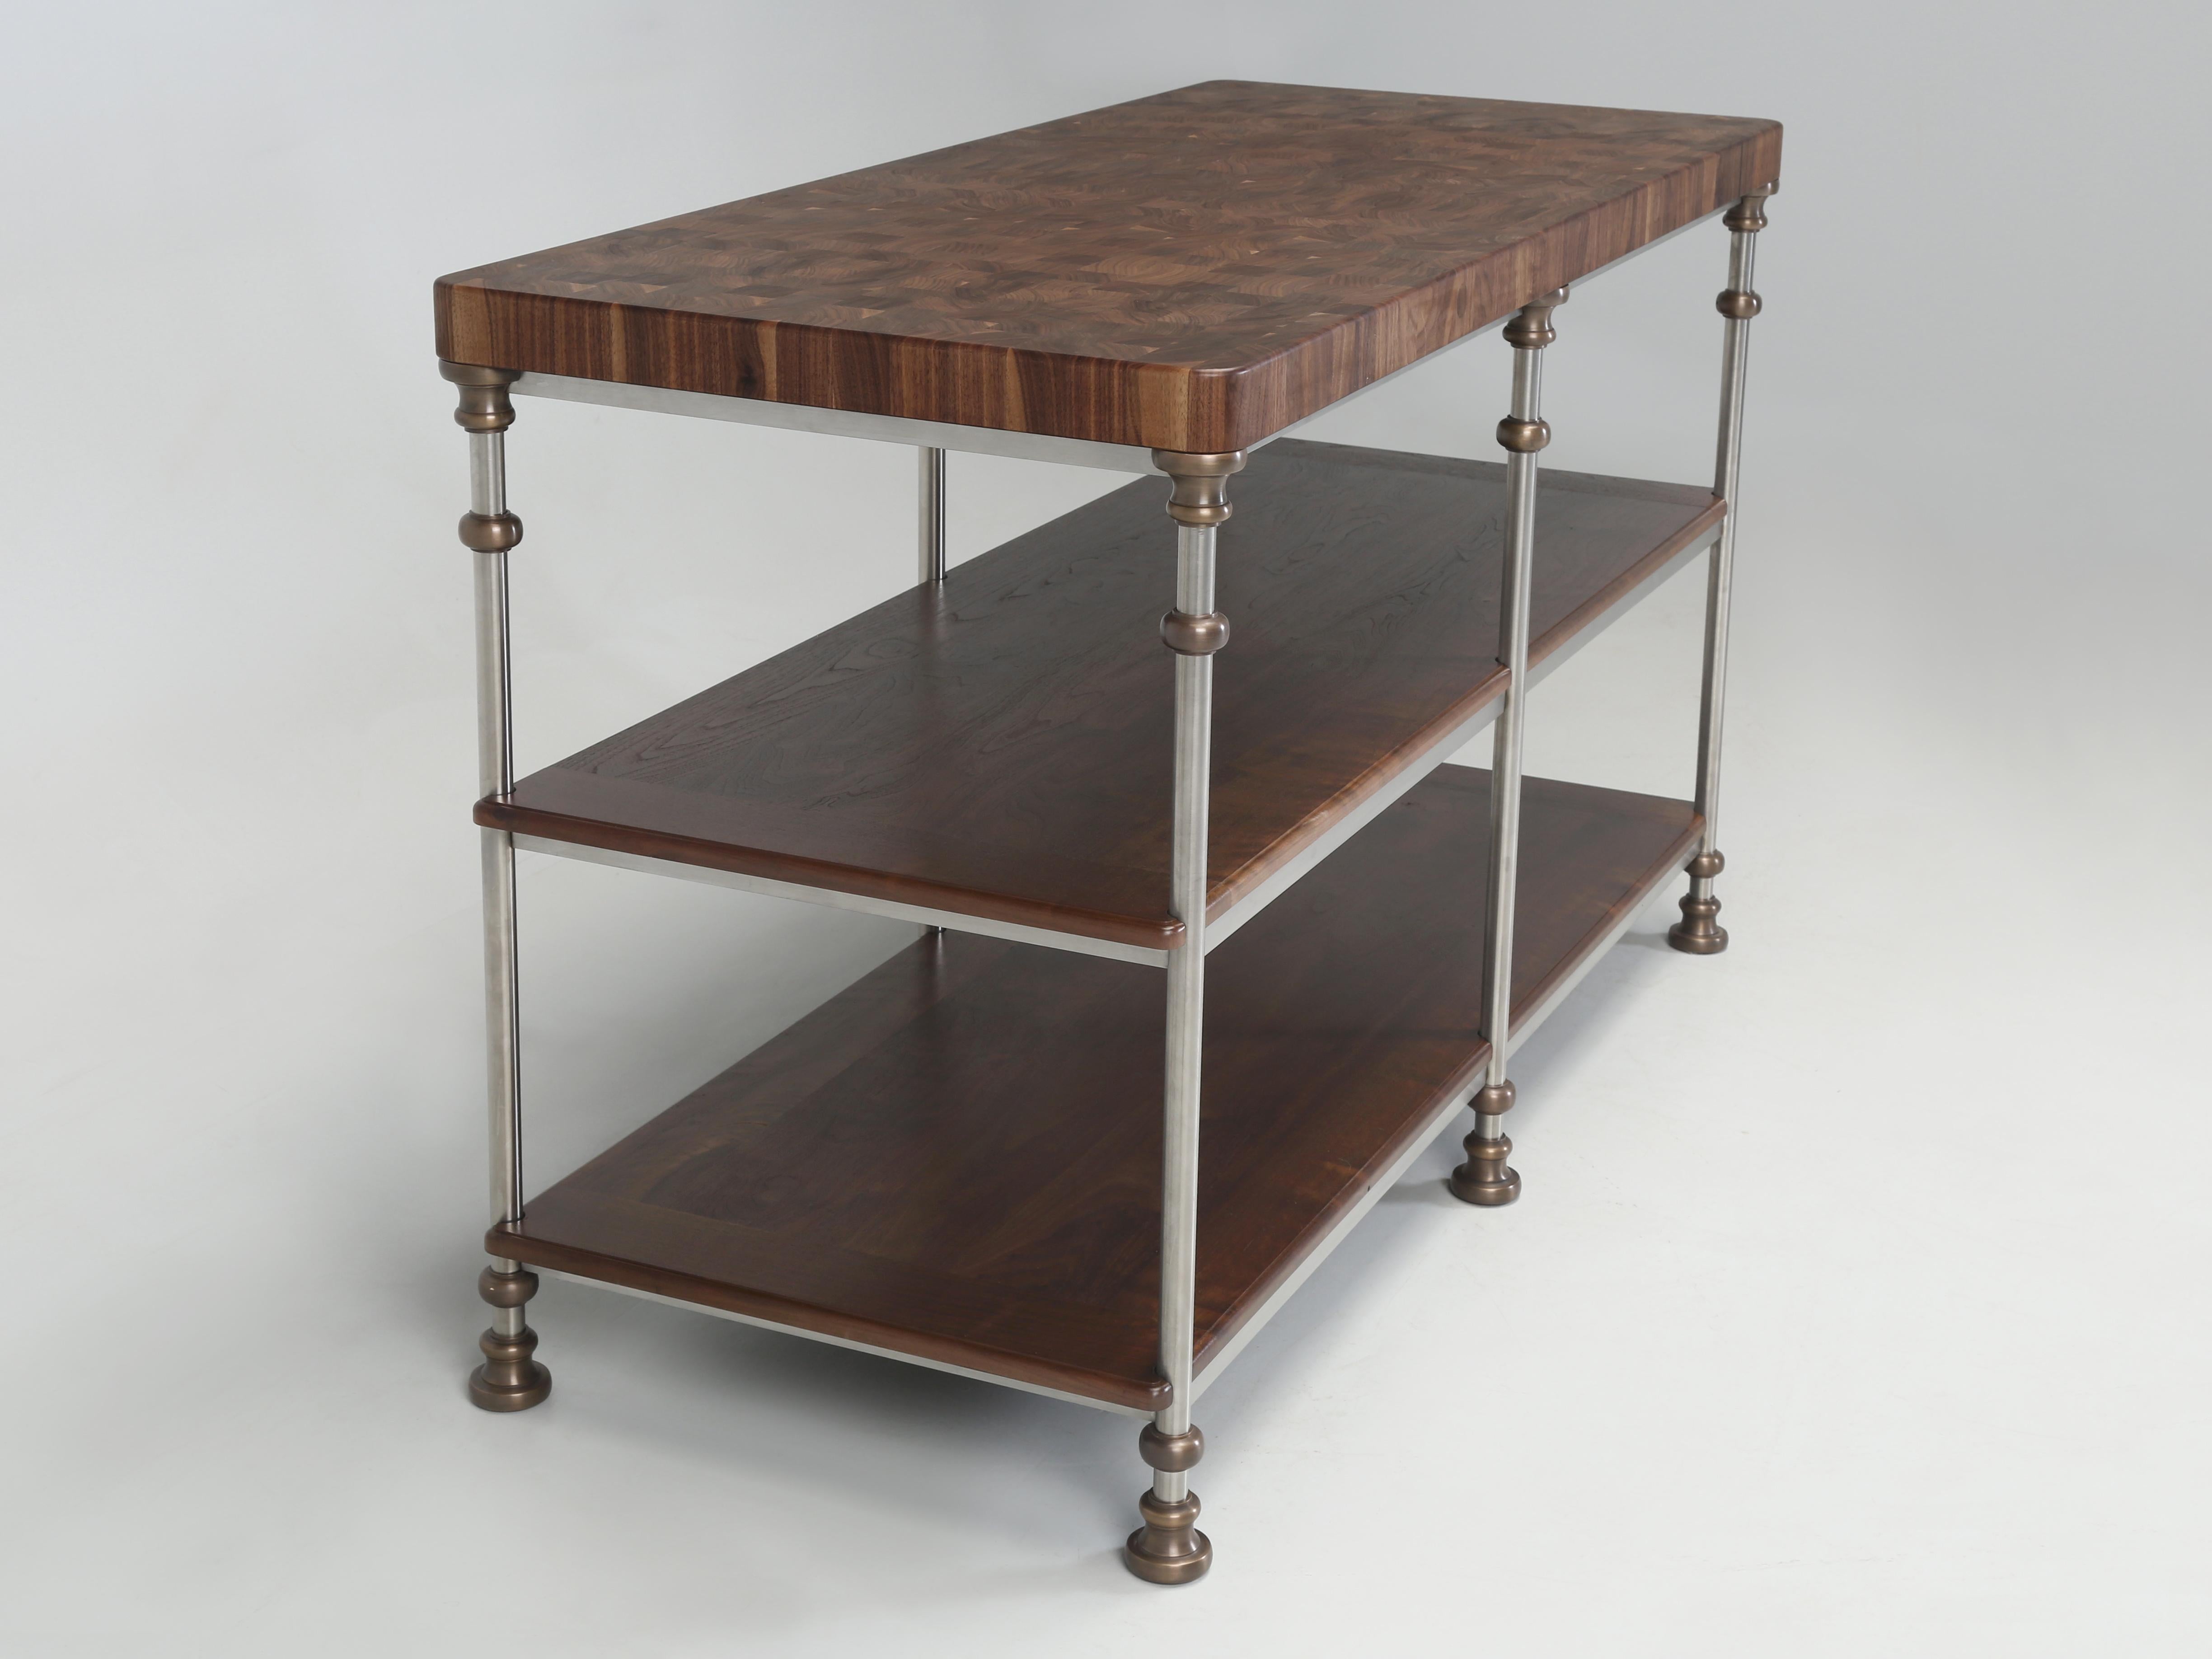 Kitchen Island made to order by Old Plank here in Chicago by artisans. This particular Kitchen Island showcases a simple stunning solid walnut Butcher Block top that pairs beautifully with the solid bronze fittings or donuts if you prefer. We build